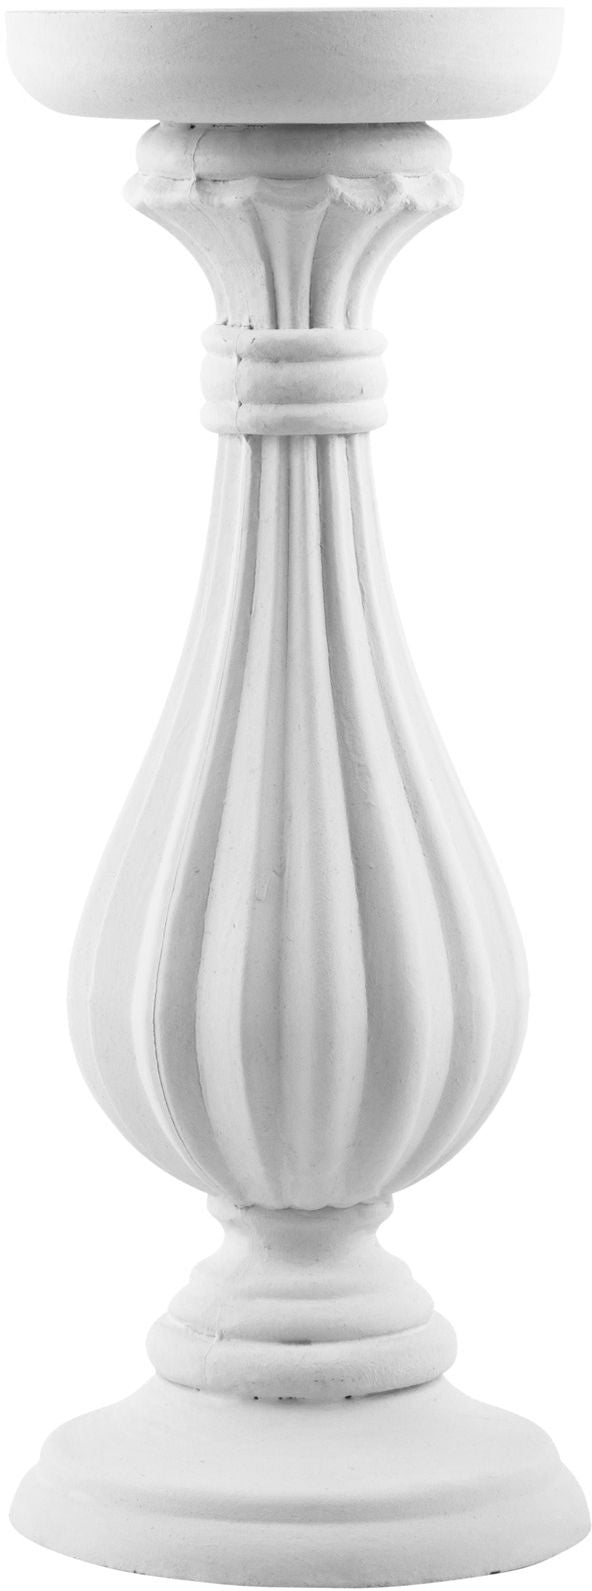 8"H WHITE RIBBED WOOD CANDLESTICK